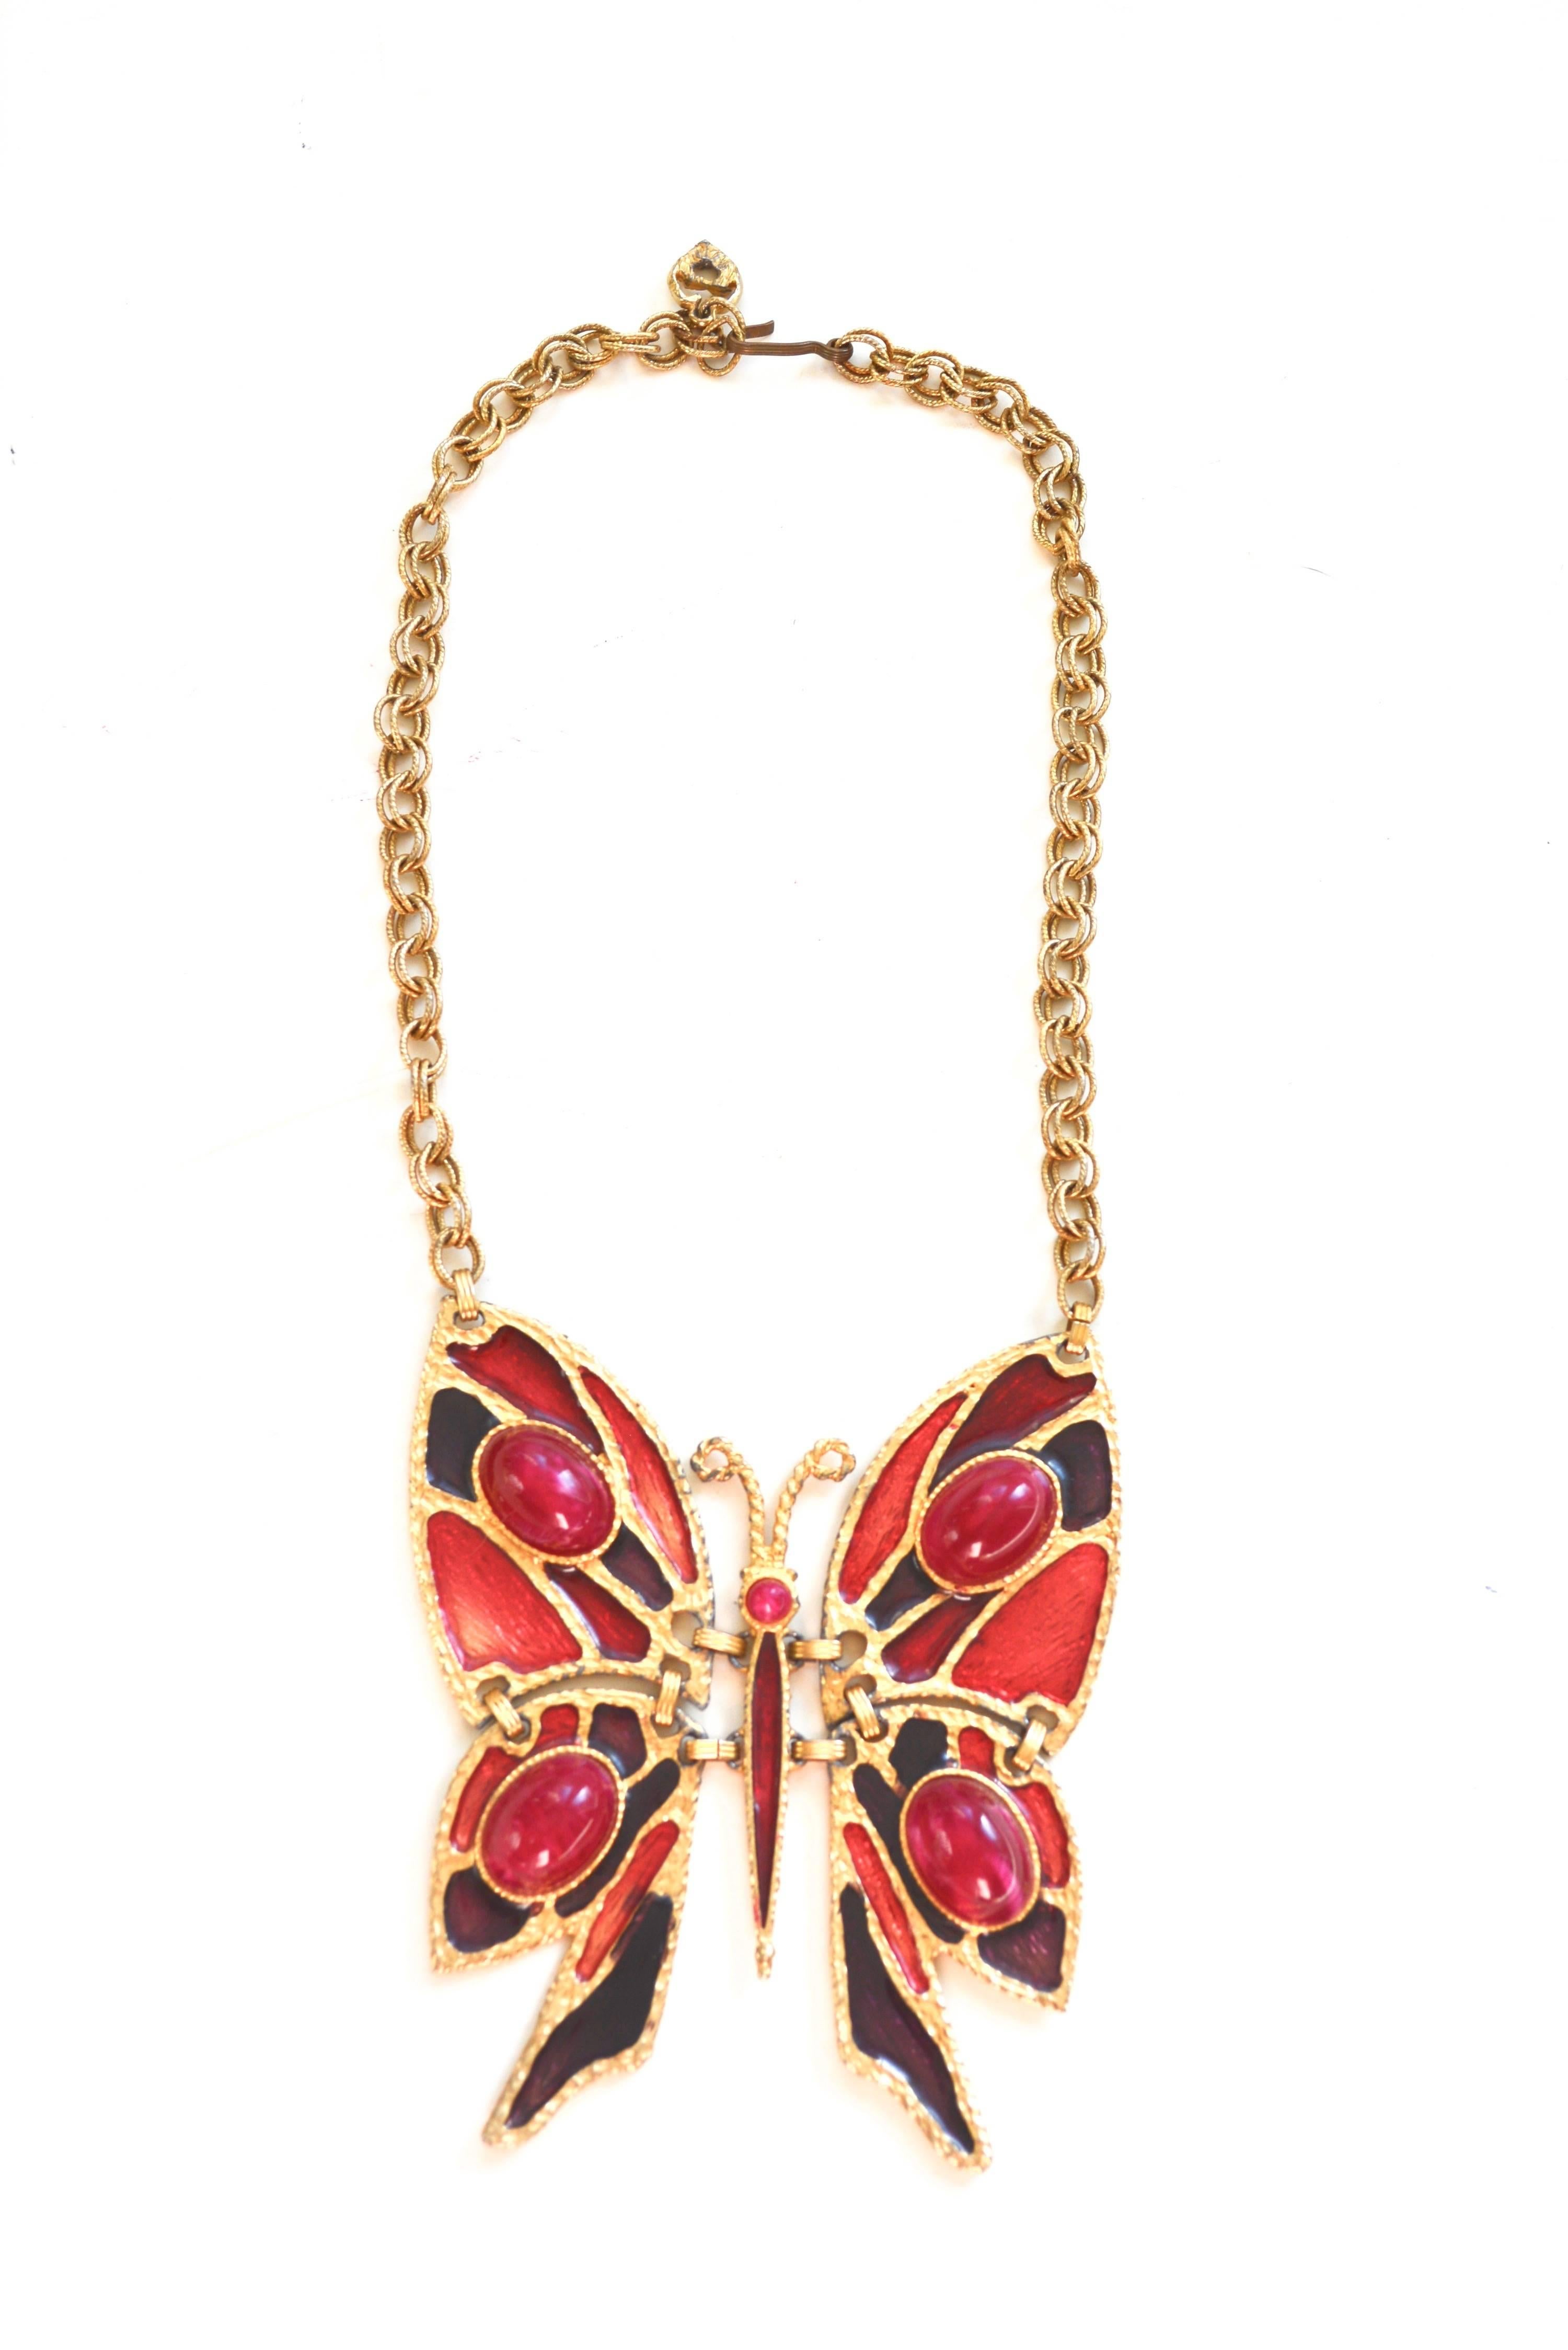 Oversized enamel butterfly necklace by Juliana with signature clasp style. Unmarked. Good overall condition with some finish wear, see images.  20